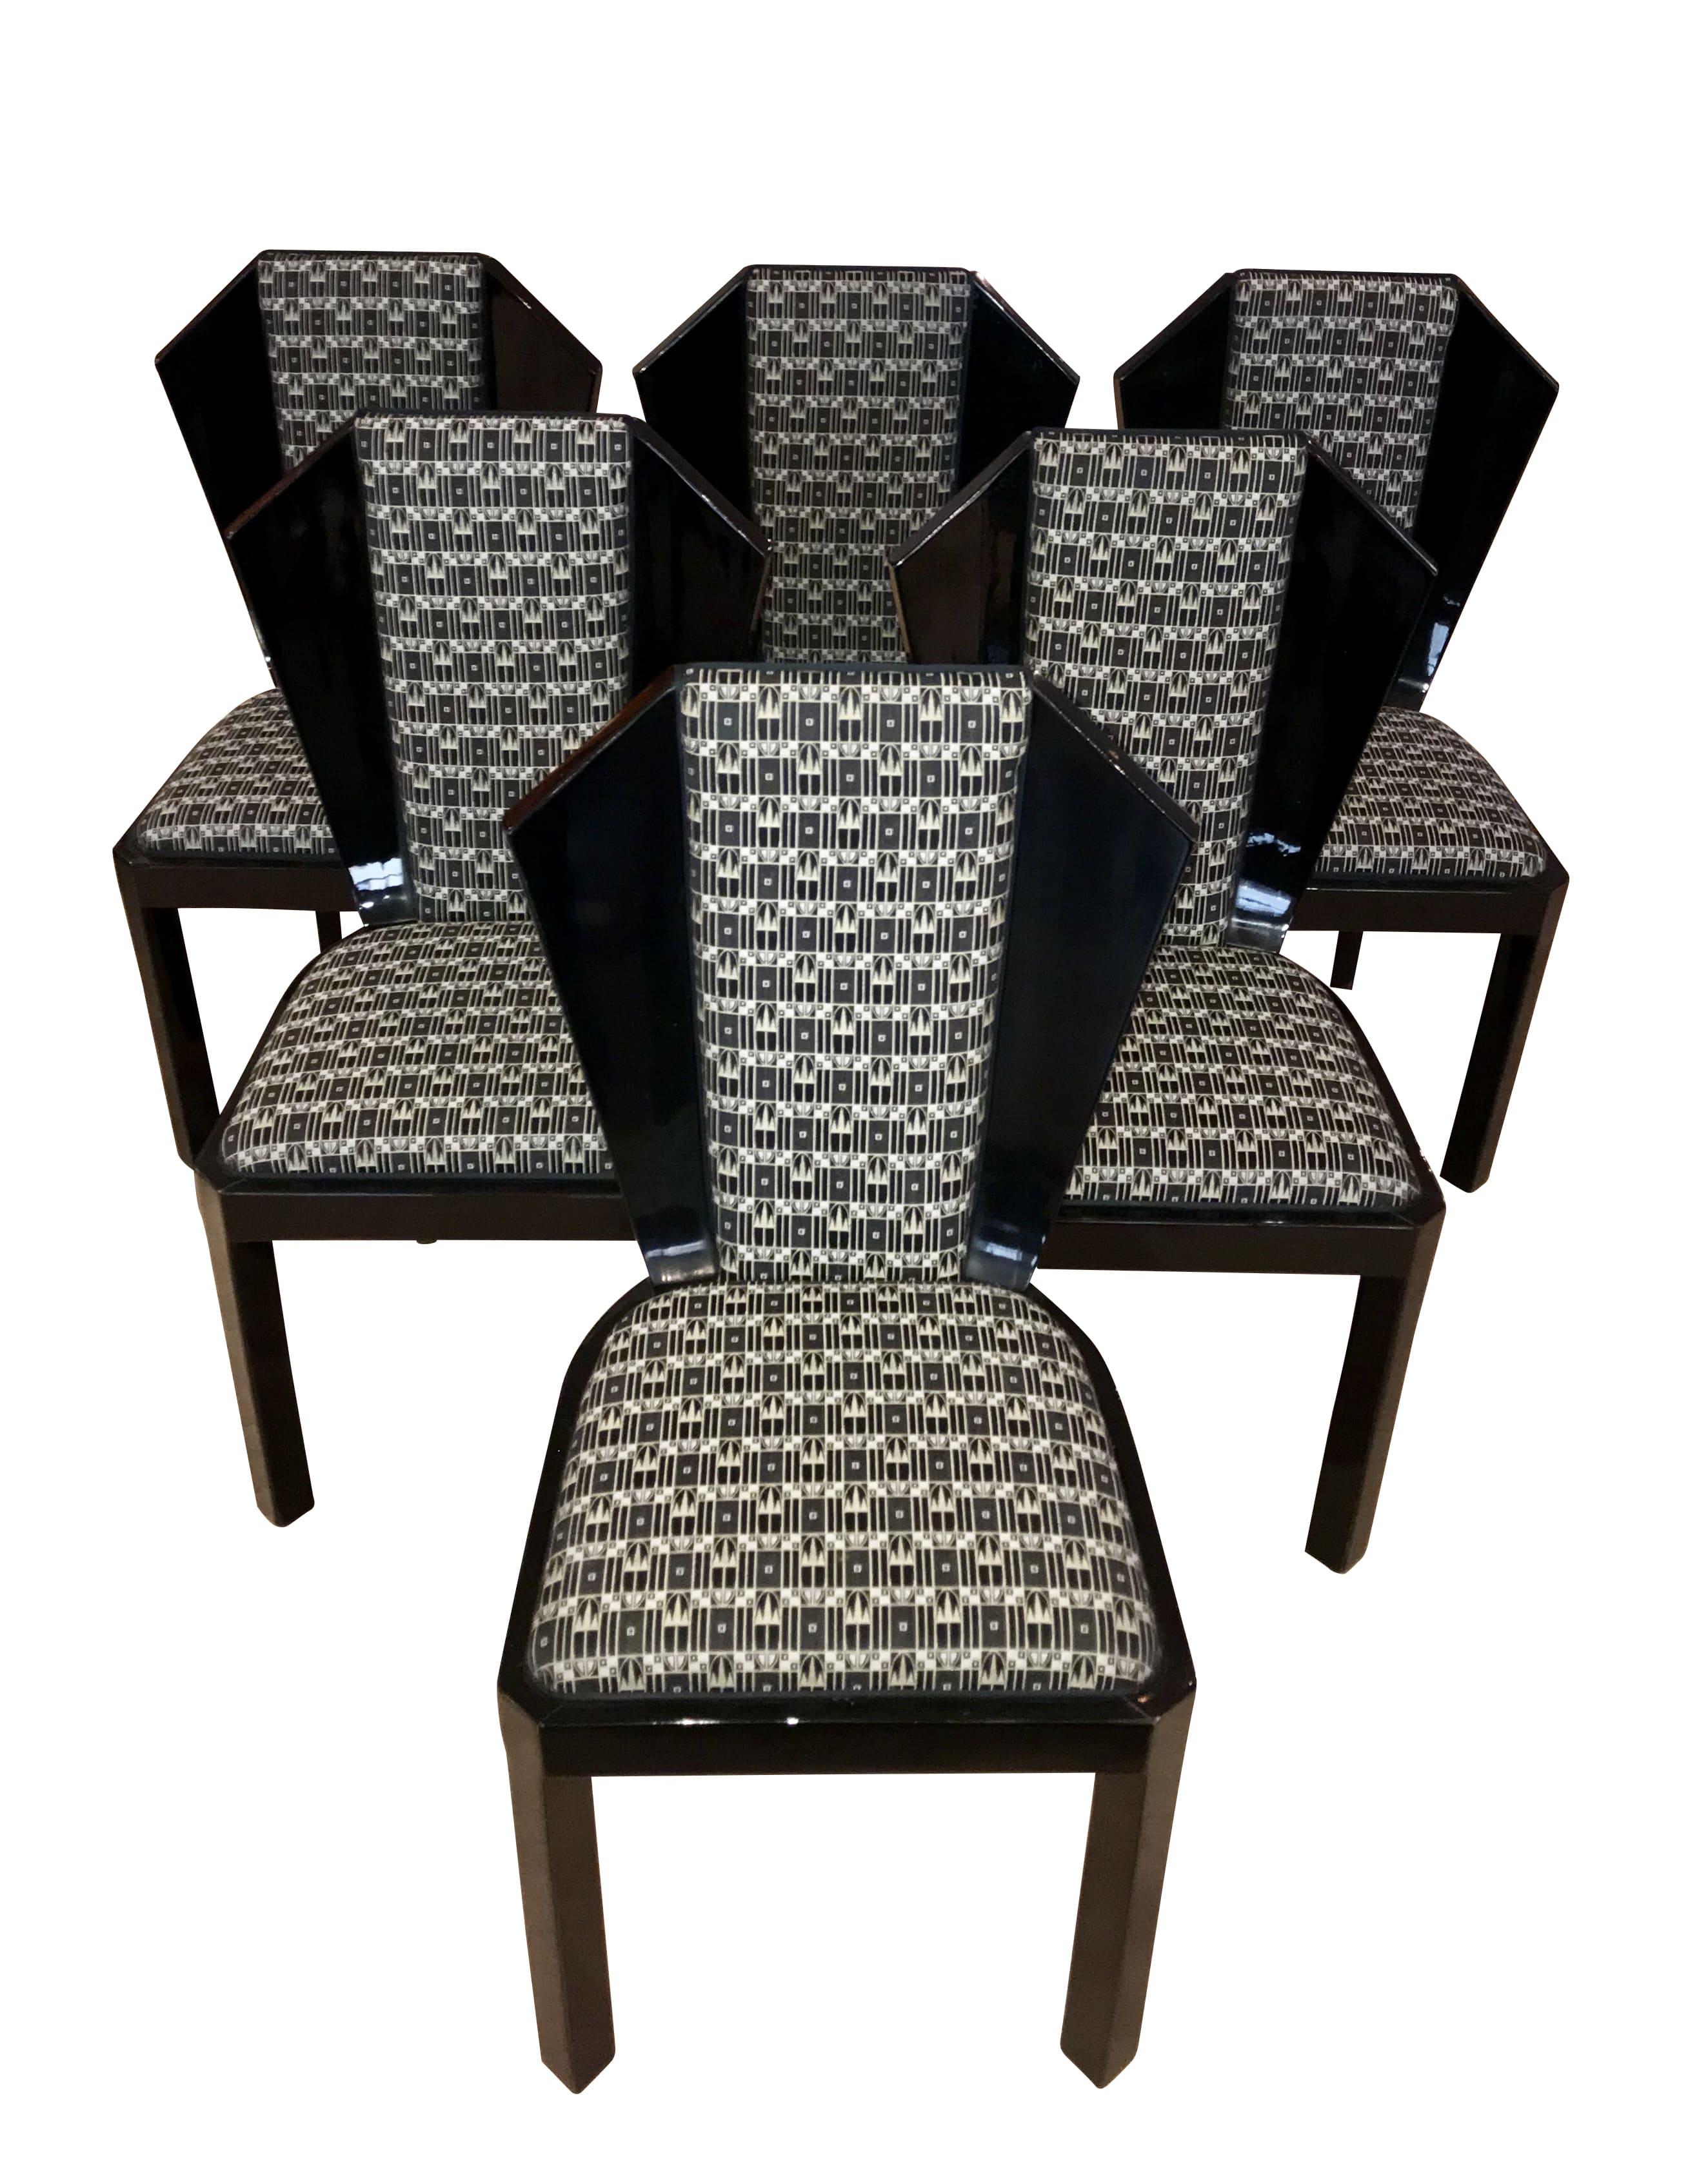 Rare set of six original Art Deco dining room chairs from France circa 1930. 

Wonderful 